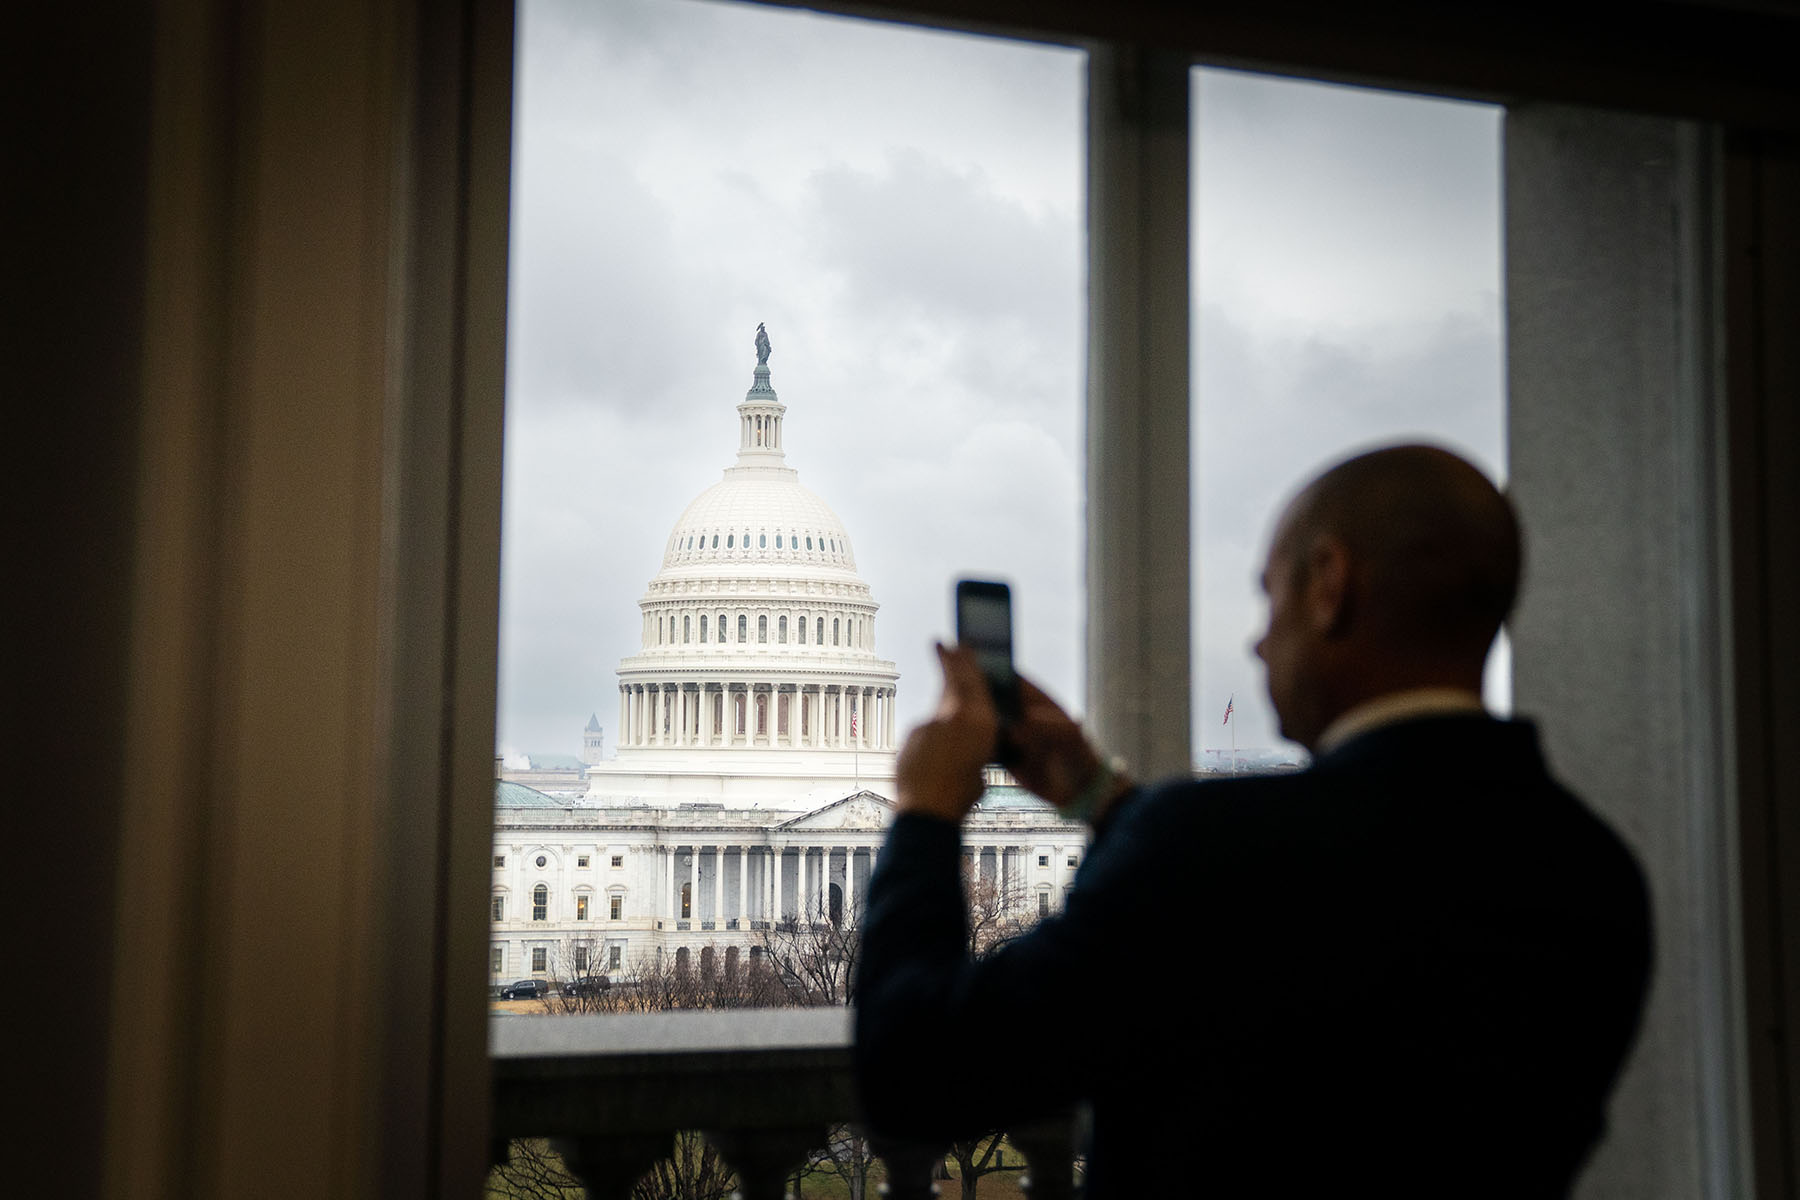 A person standing at a window takes a photograph of the East Plaza of the U.S. Capitol from the Library of Congress.